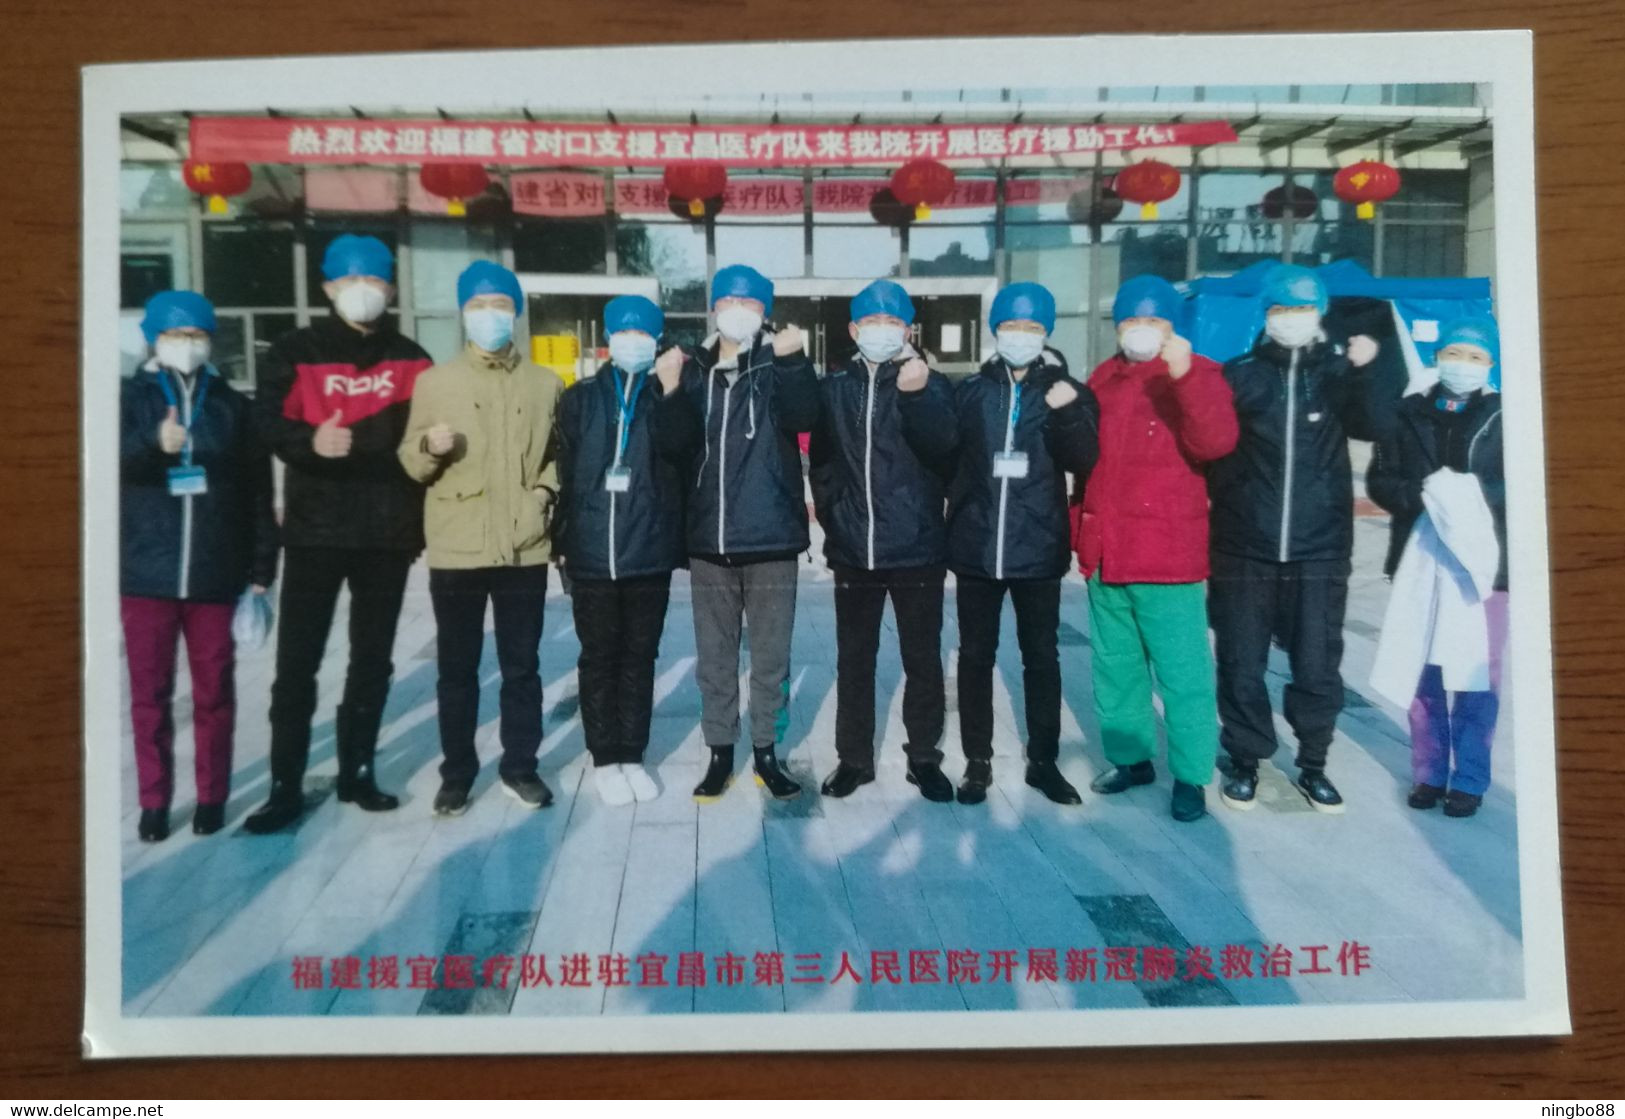 Treating Curing Patients Of NCP,CN 20 Fujian Medical Team Aid Yichang Fight COVID-19 Photo-printed-in Personalized PSC - Enfermedades